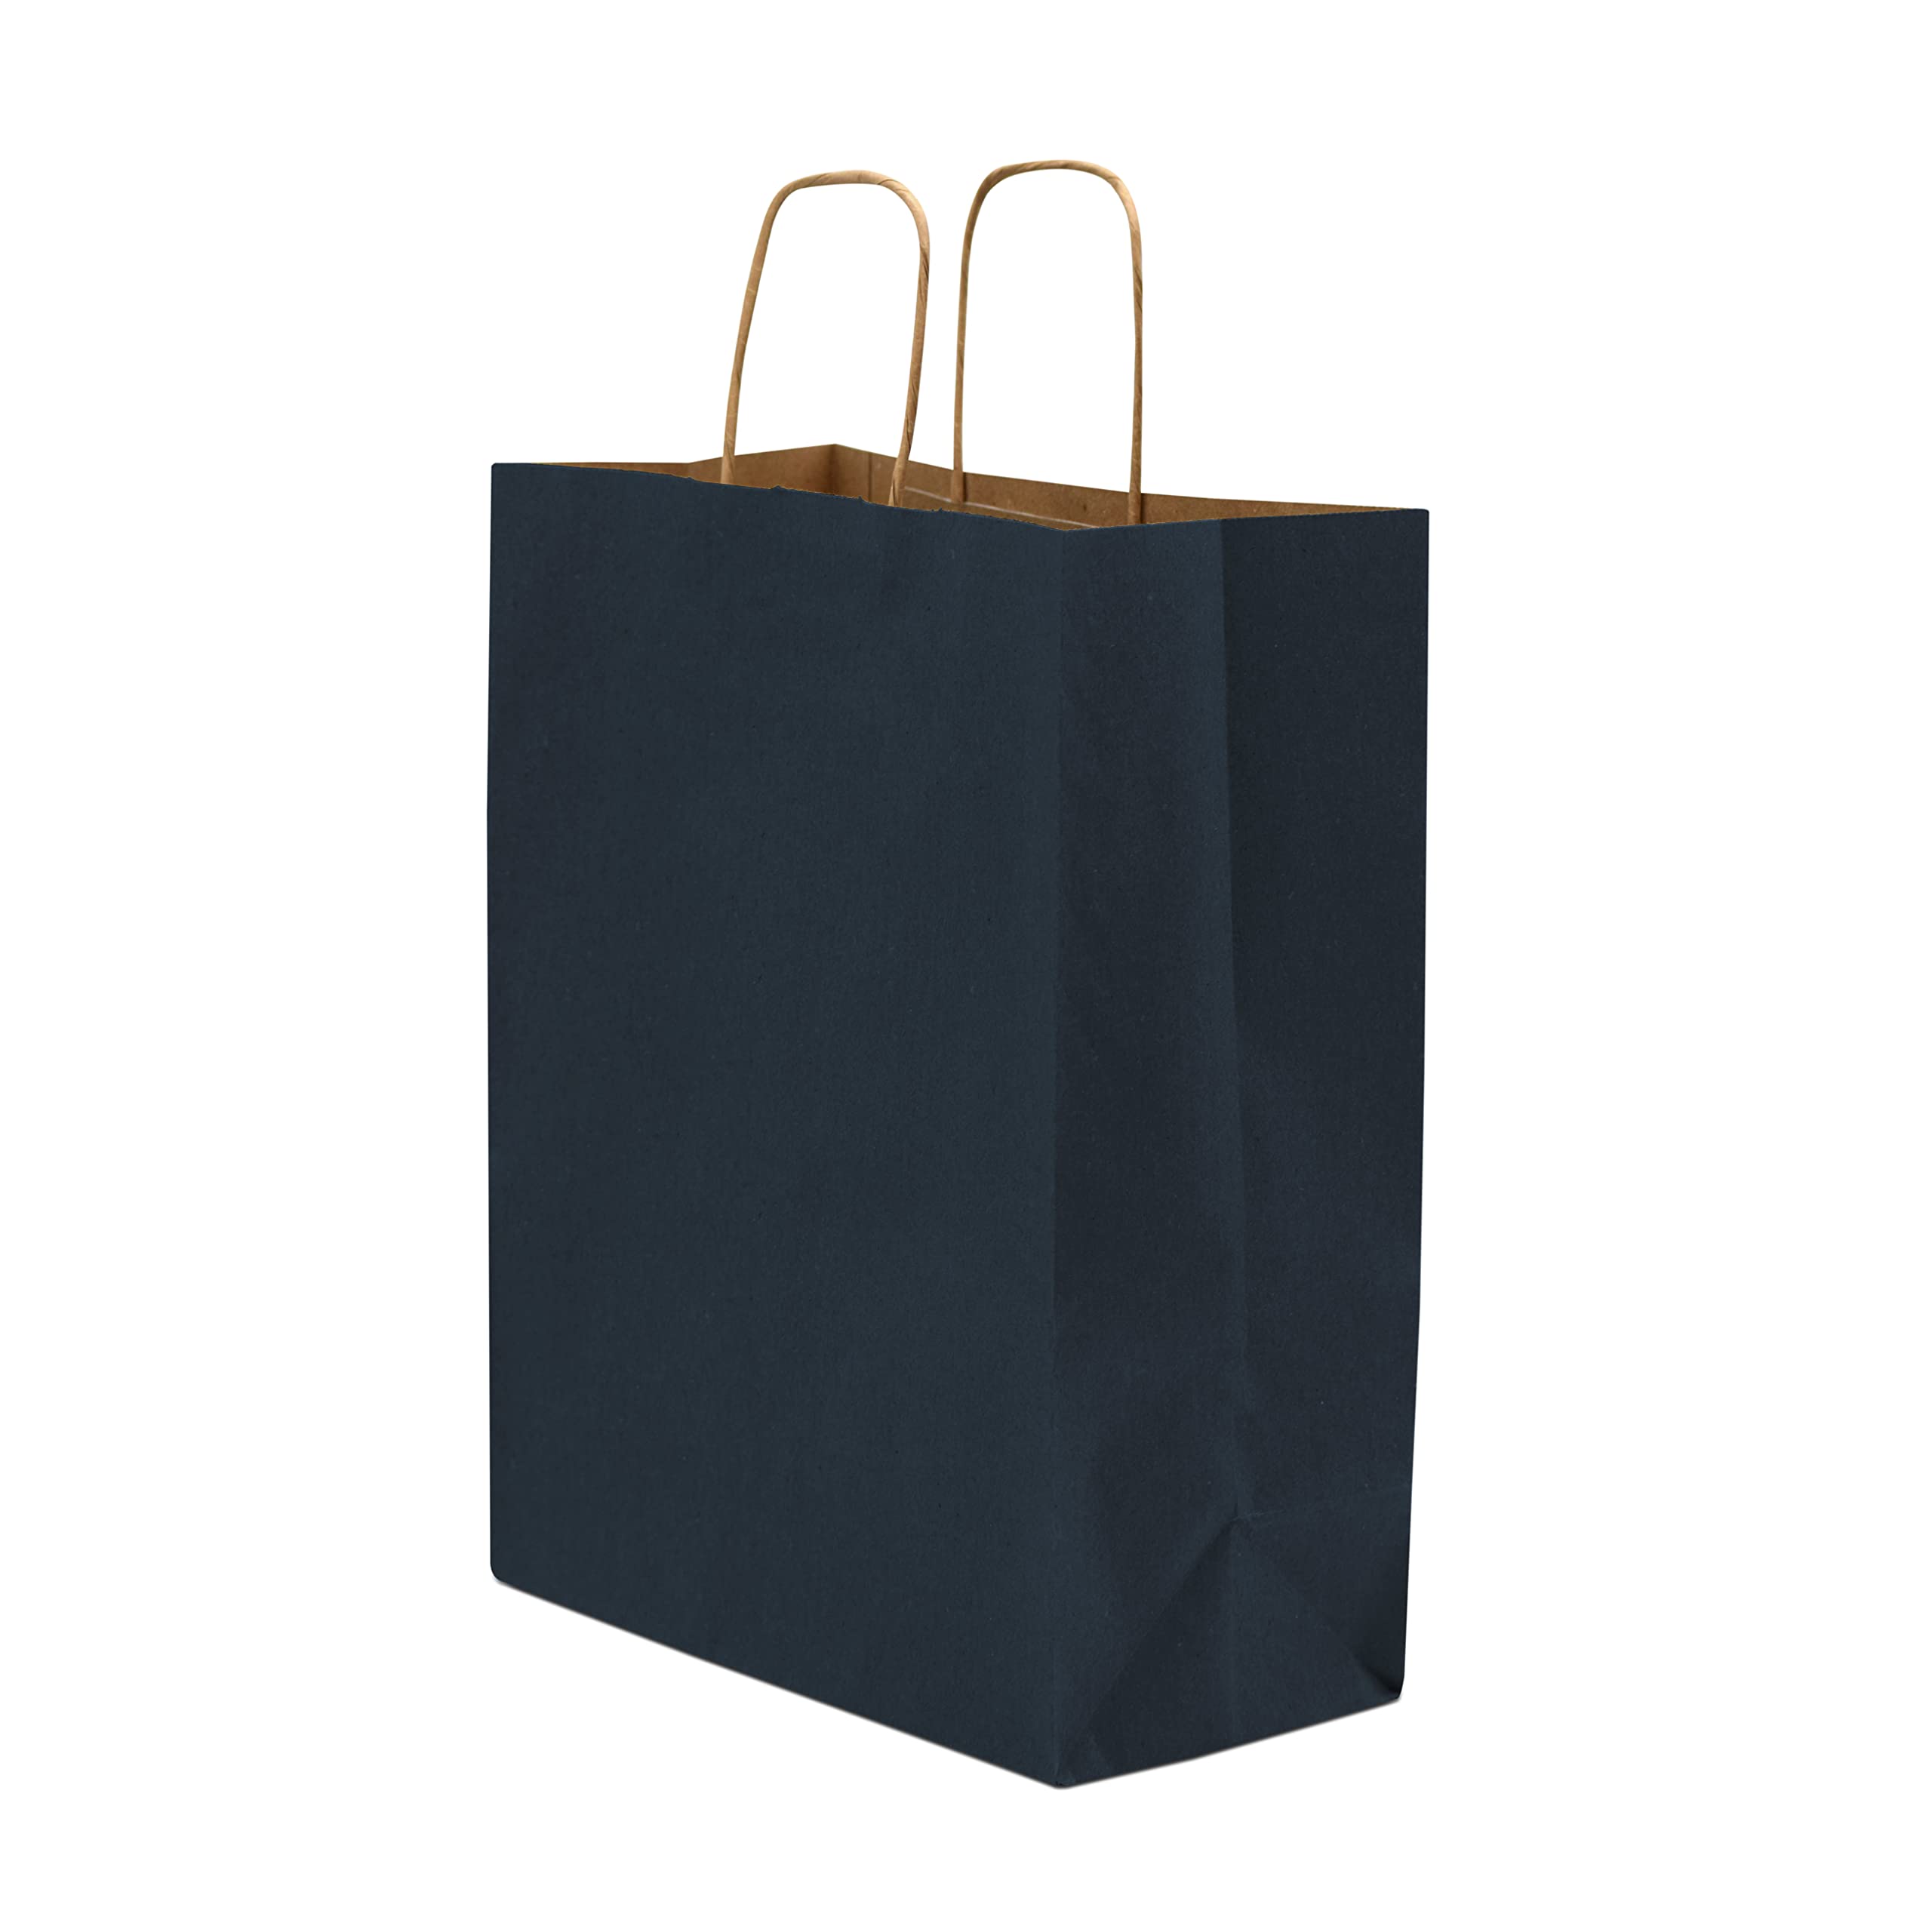 Blue Gift Bags - 10x5x13 100 Pack Navy Blue Gift Bags, Medium Size Kraft Paper Shopping Bags with Handles for Small Business, Retail, Boutique Merchandise, Goodie & Favor Bags, Boys Gift Wrap, Bulk  - Like New